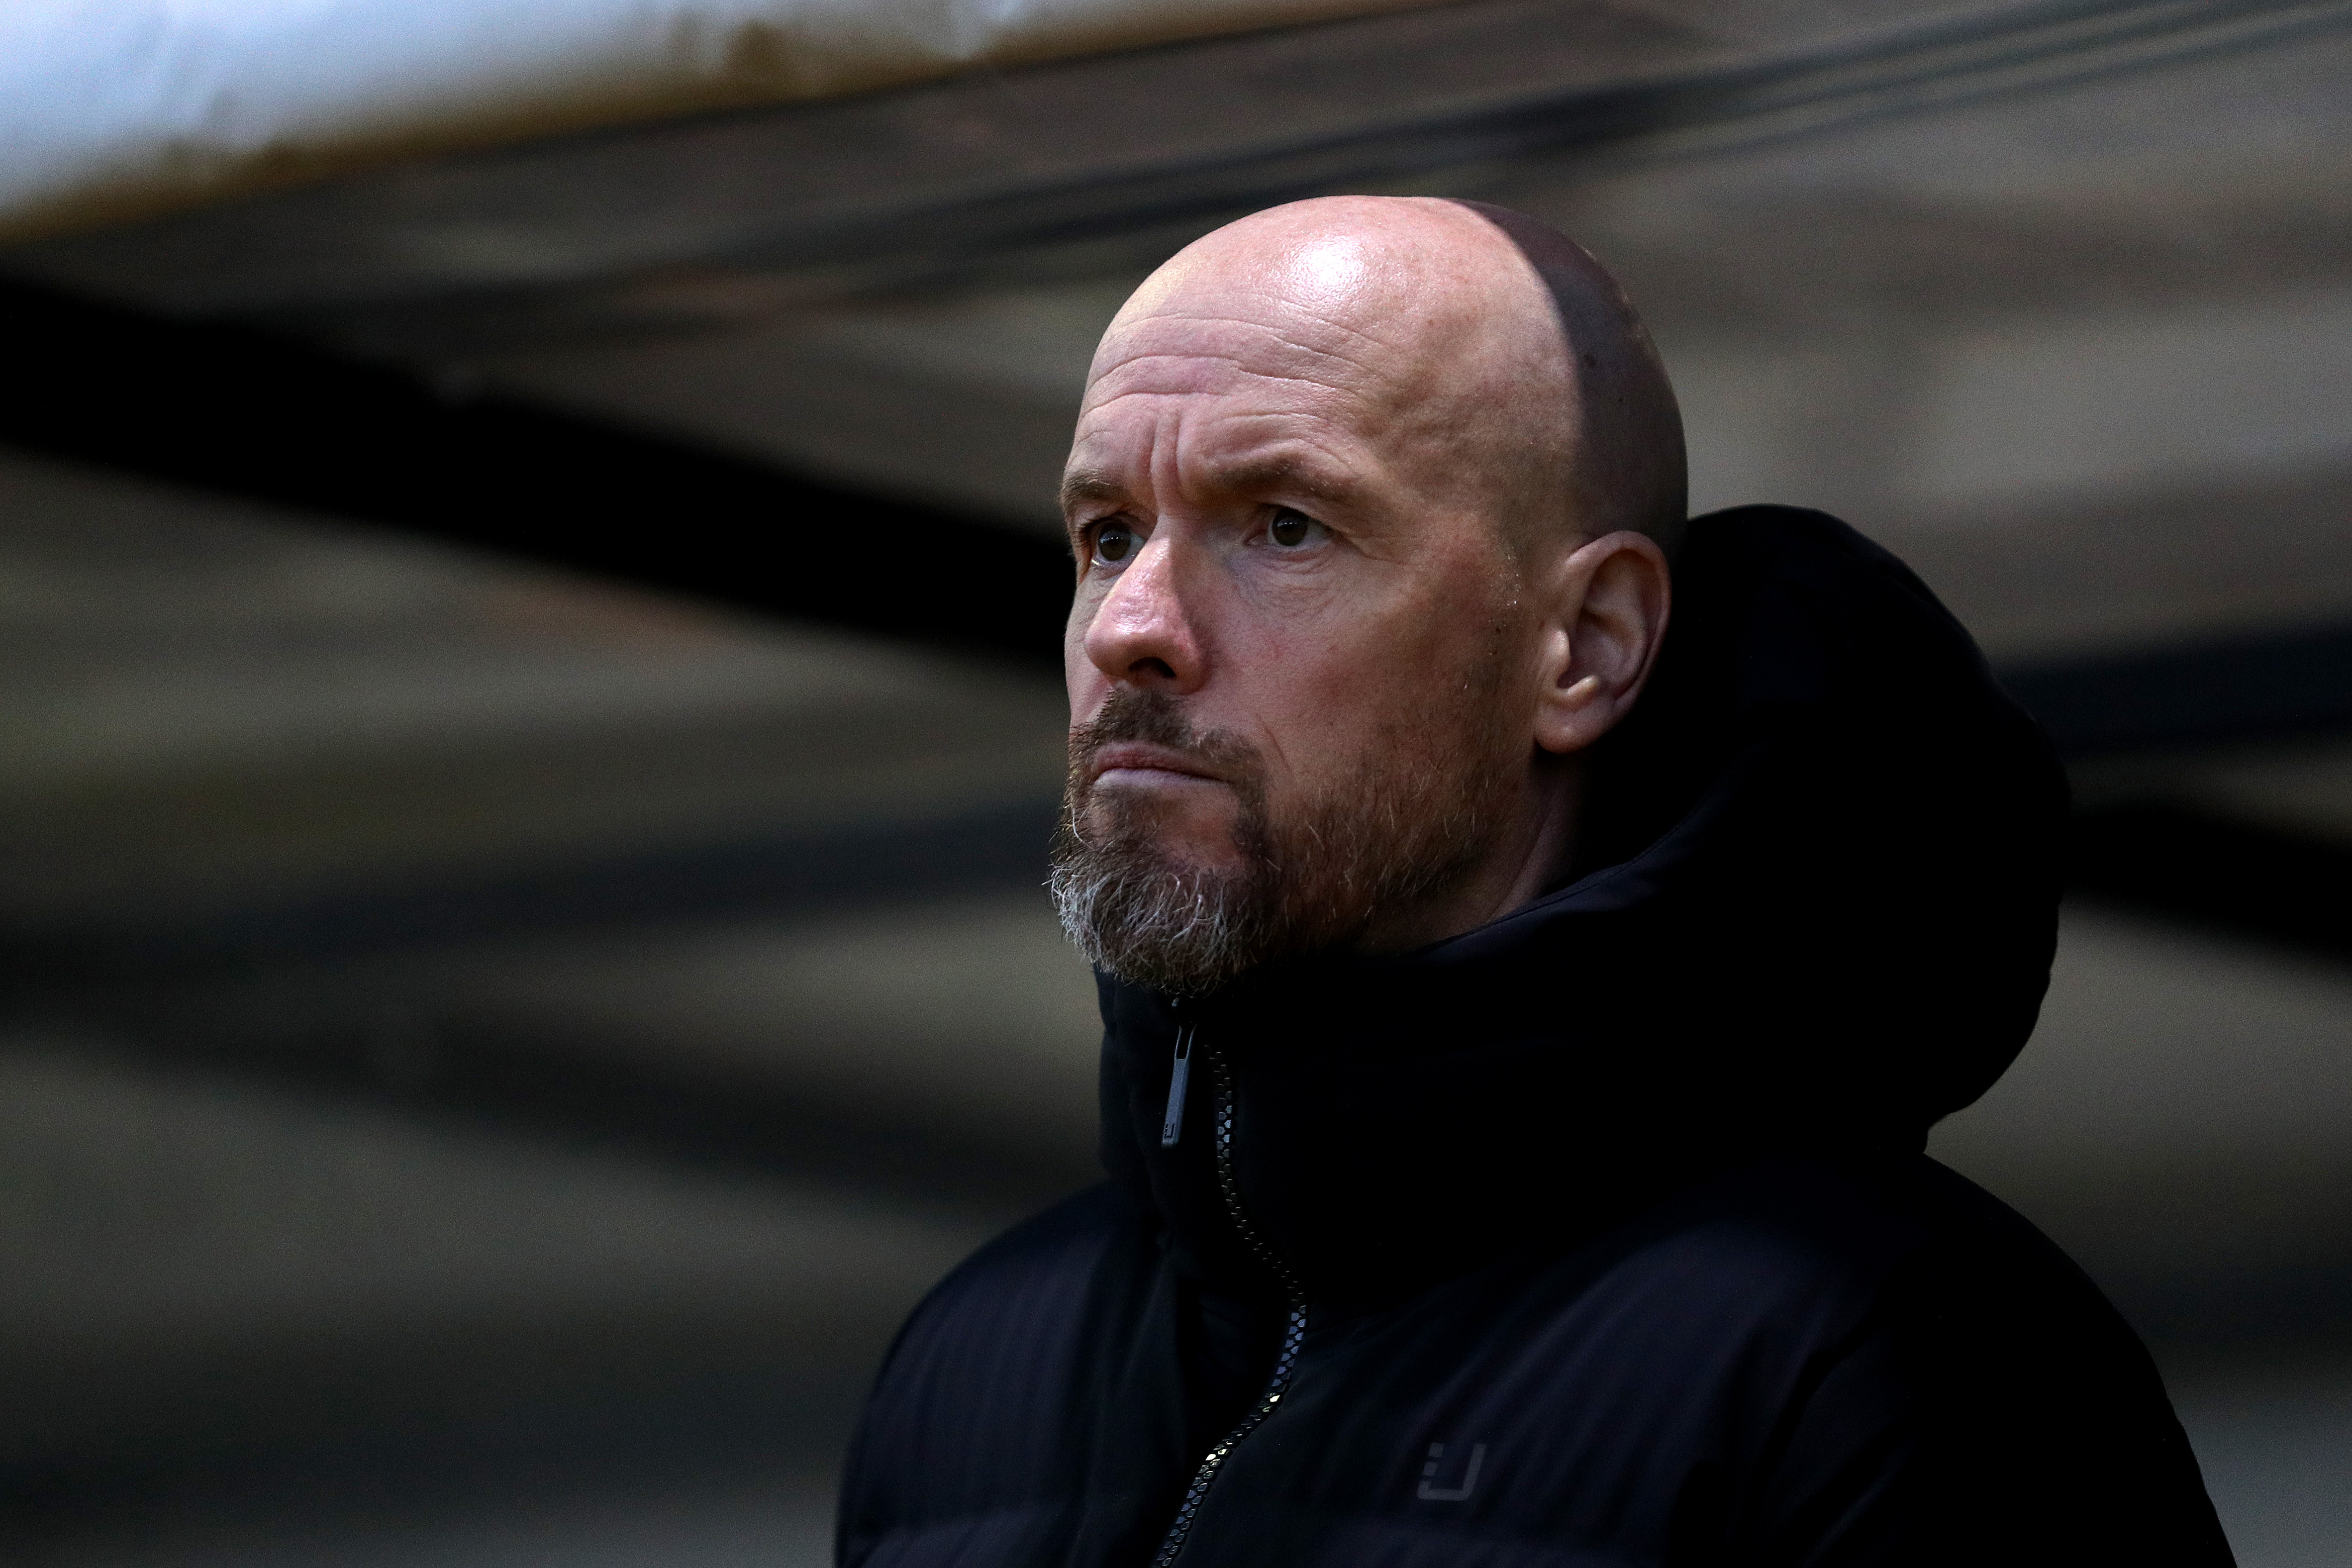 Erik ten Hag exit route emerges if Manchester United swing axe this summer: report